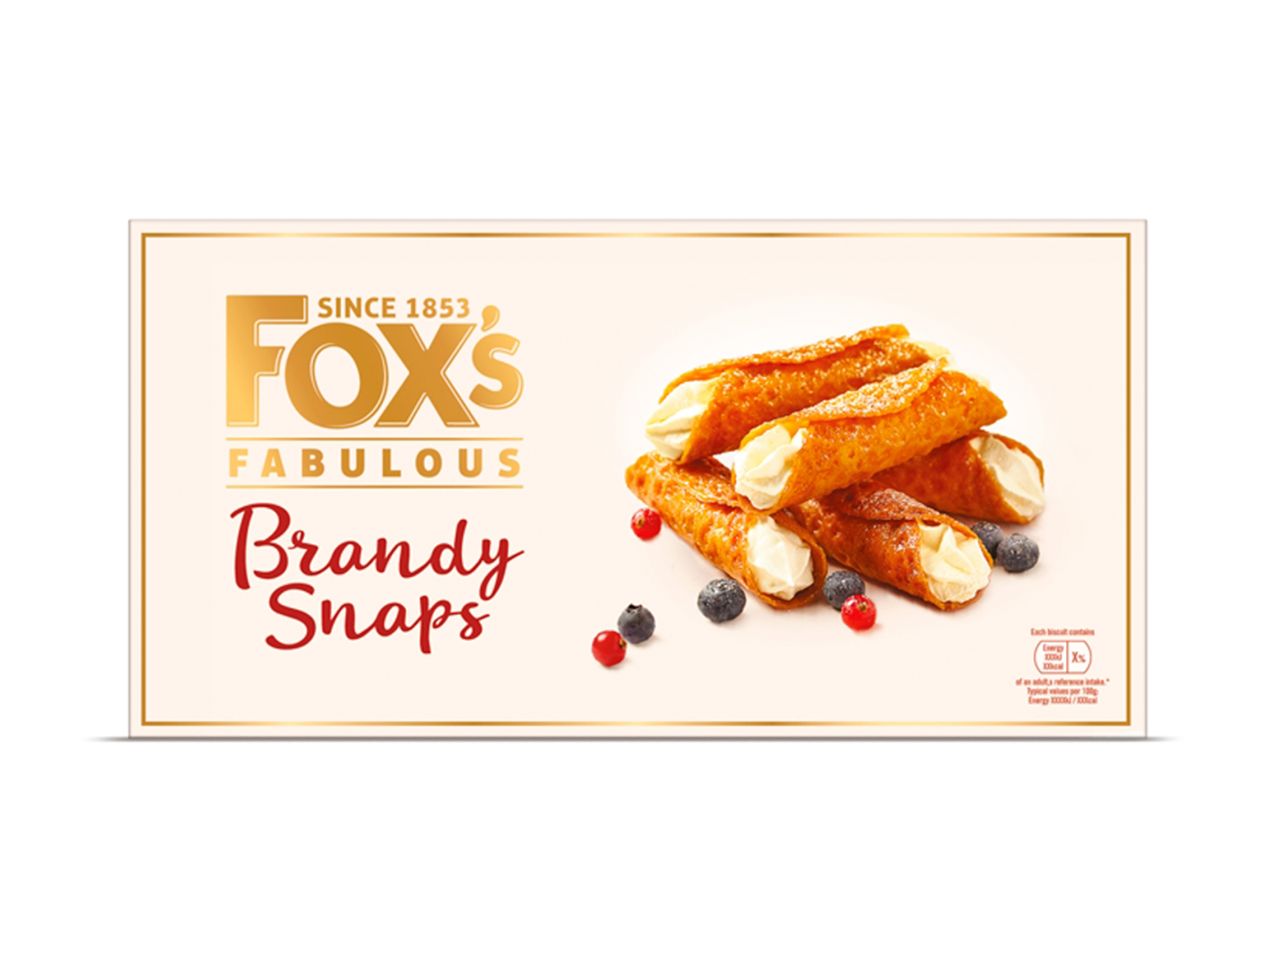 Go to full screen view: Fox's Brandy Snaps - Image 1